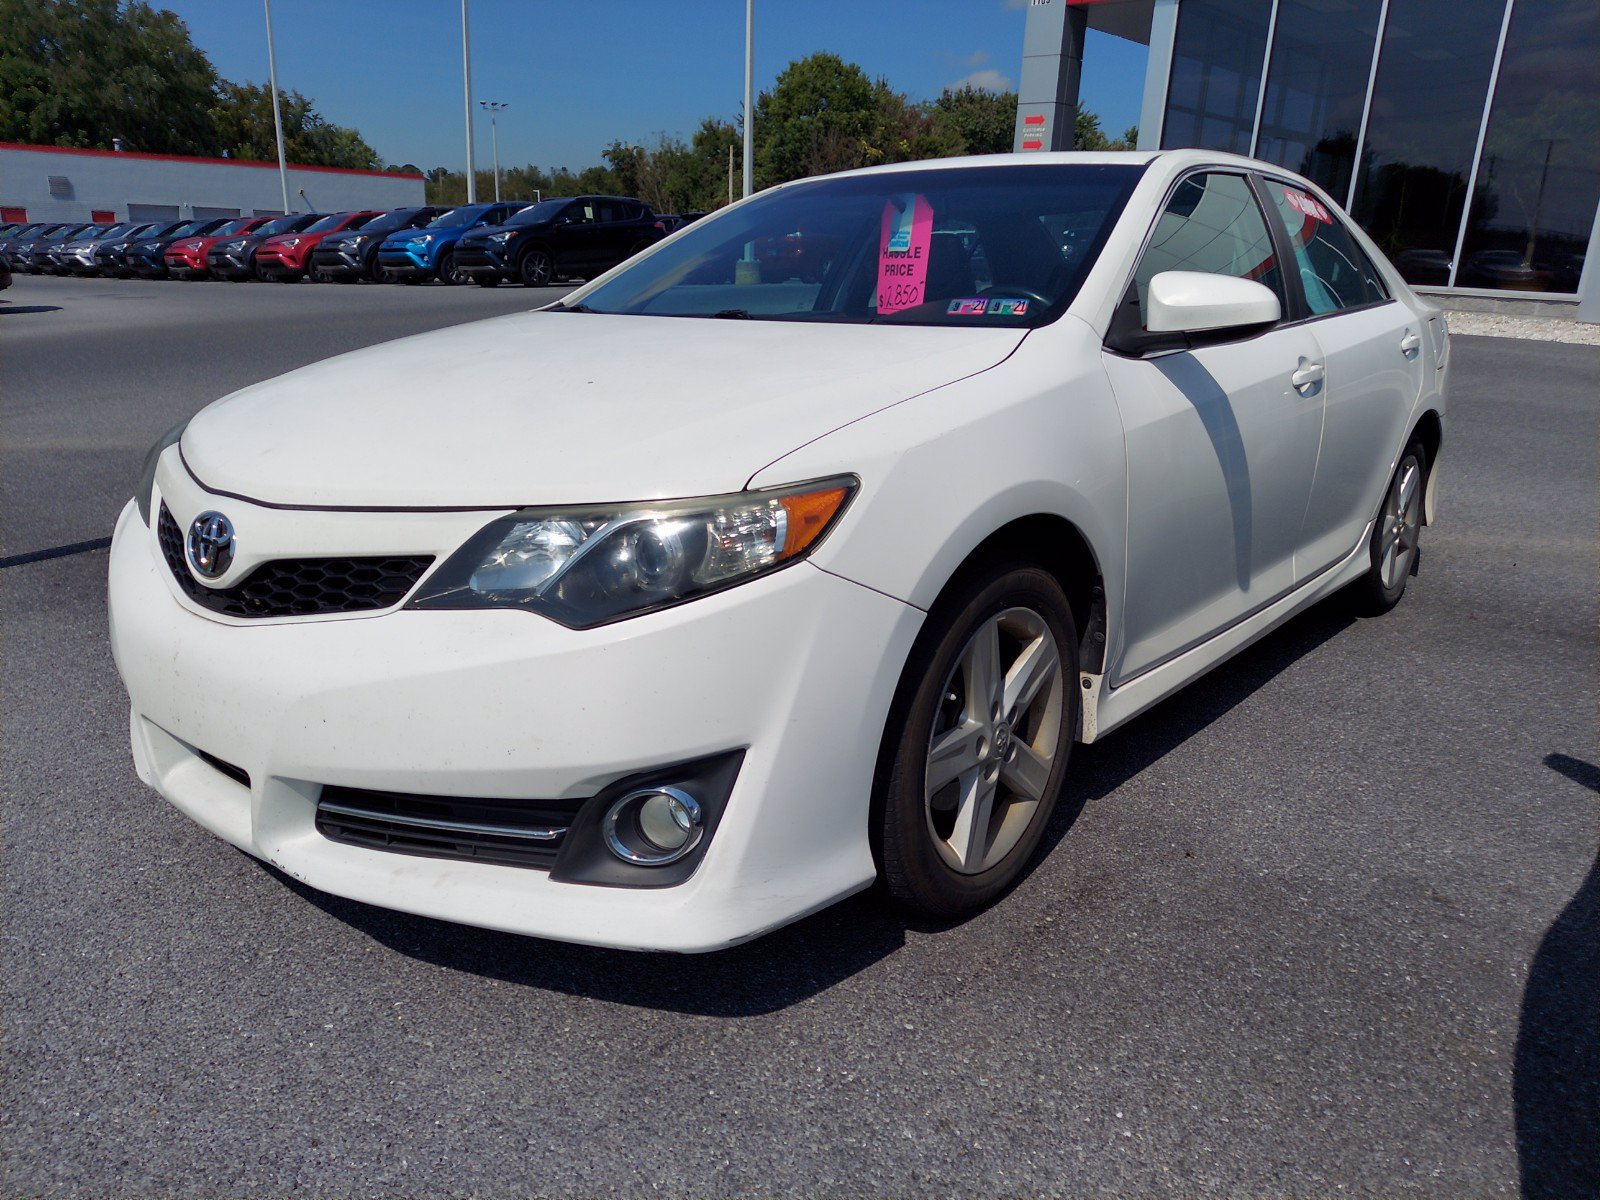 Pre-Owned 2012 Toyota Camry SE 4dr Car in East Petersburg #U15270A ...